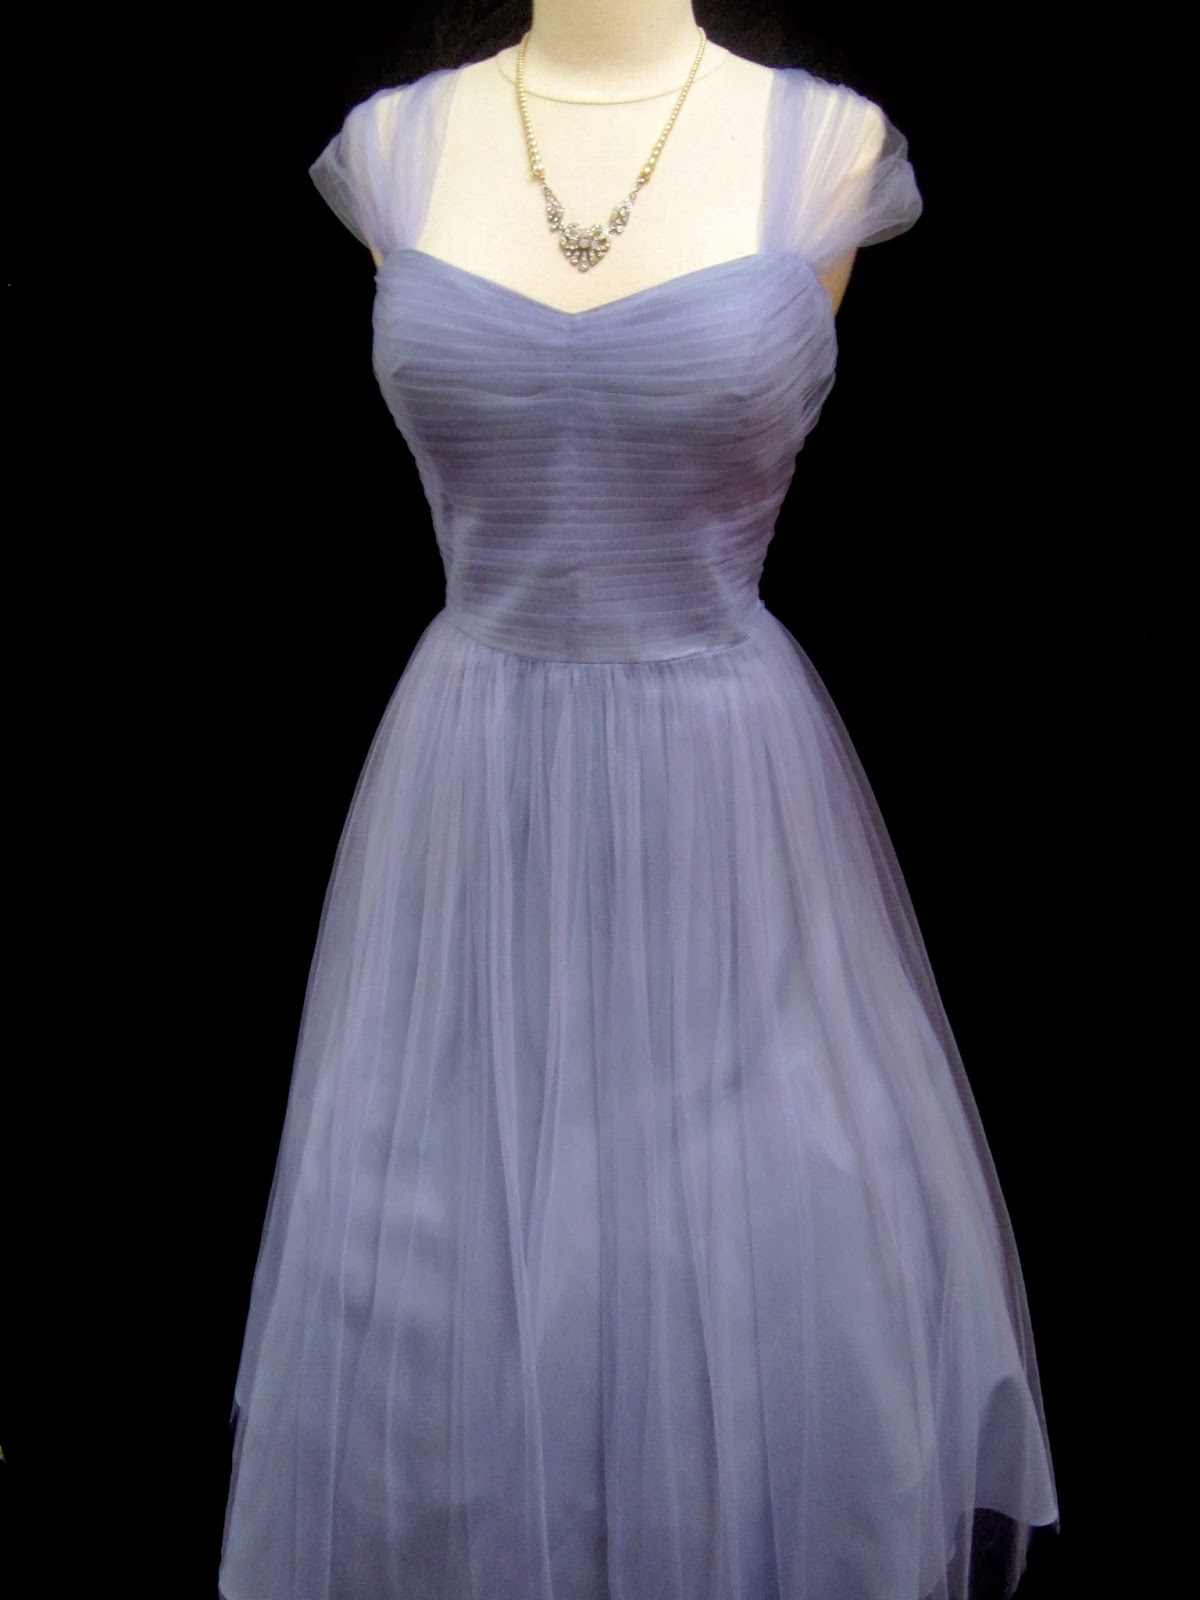 vintage tea length wedding dresses 1950s Style Bridesmaid prom dresses available to order!!!!